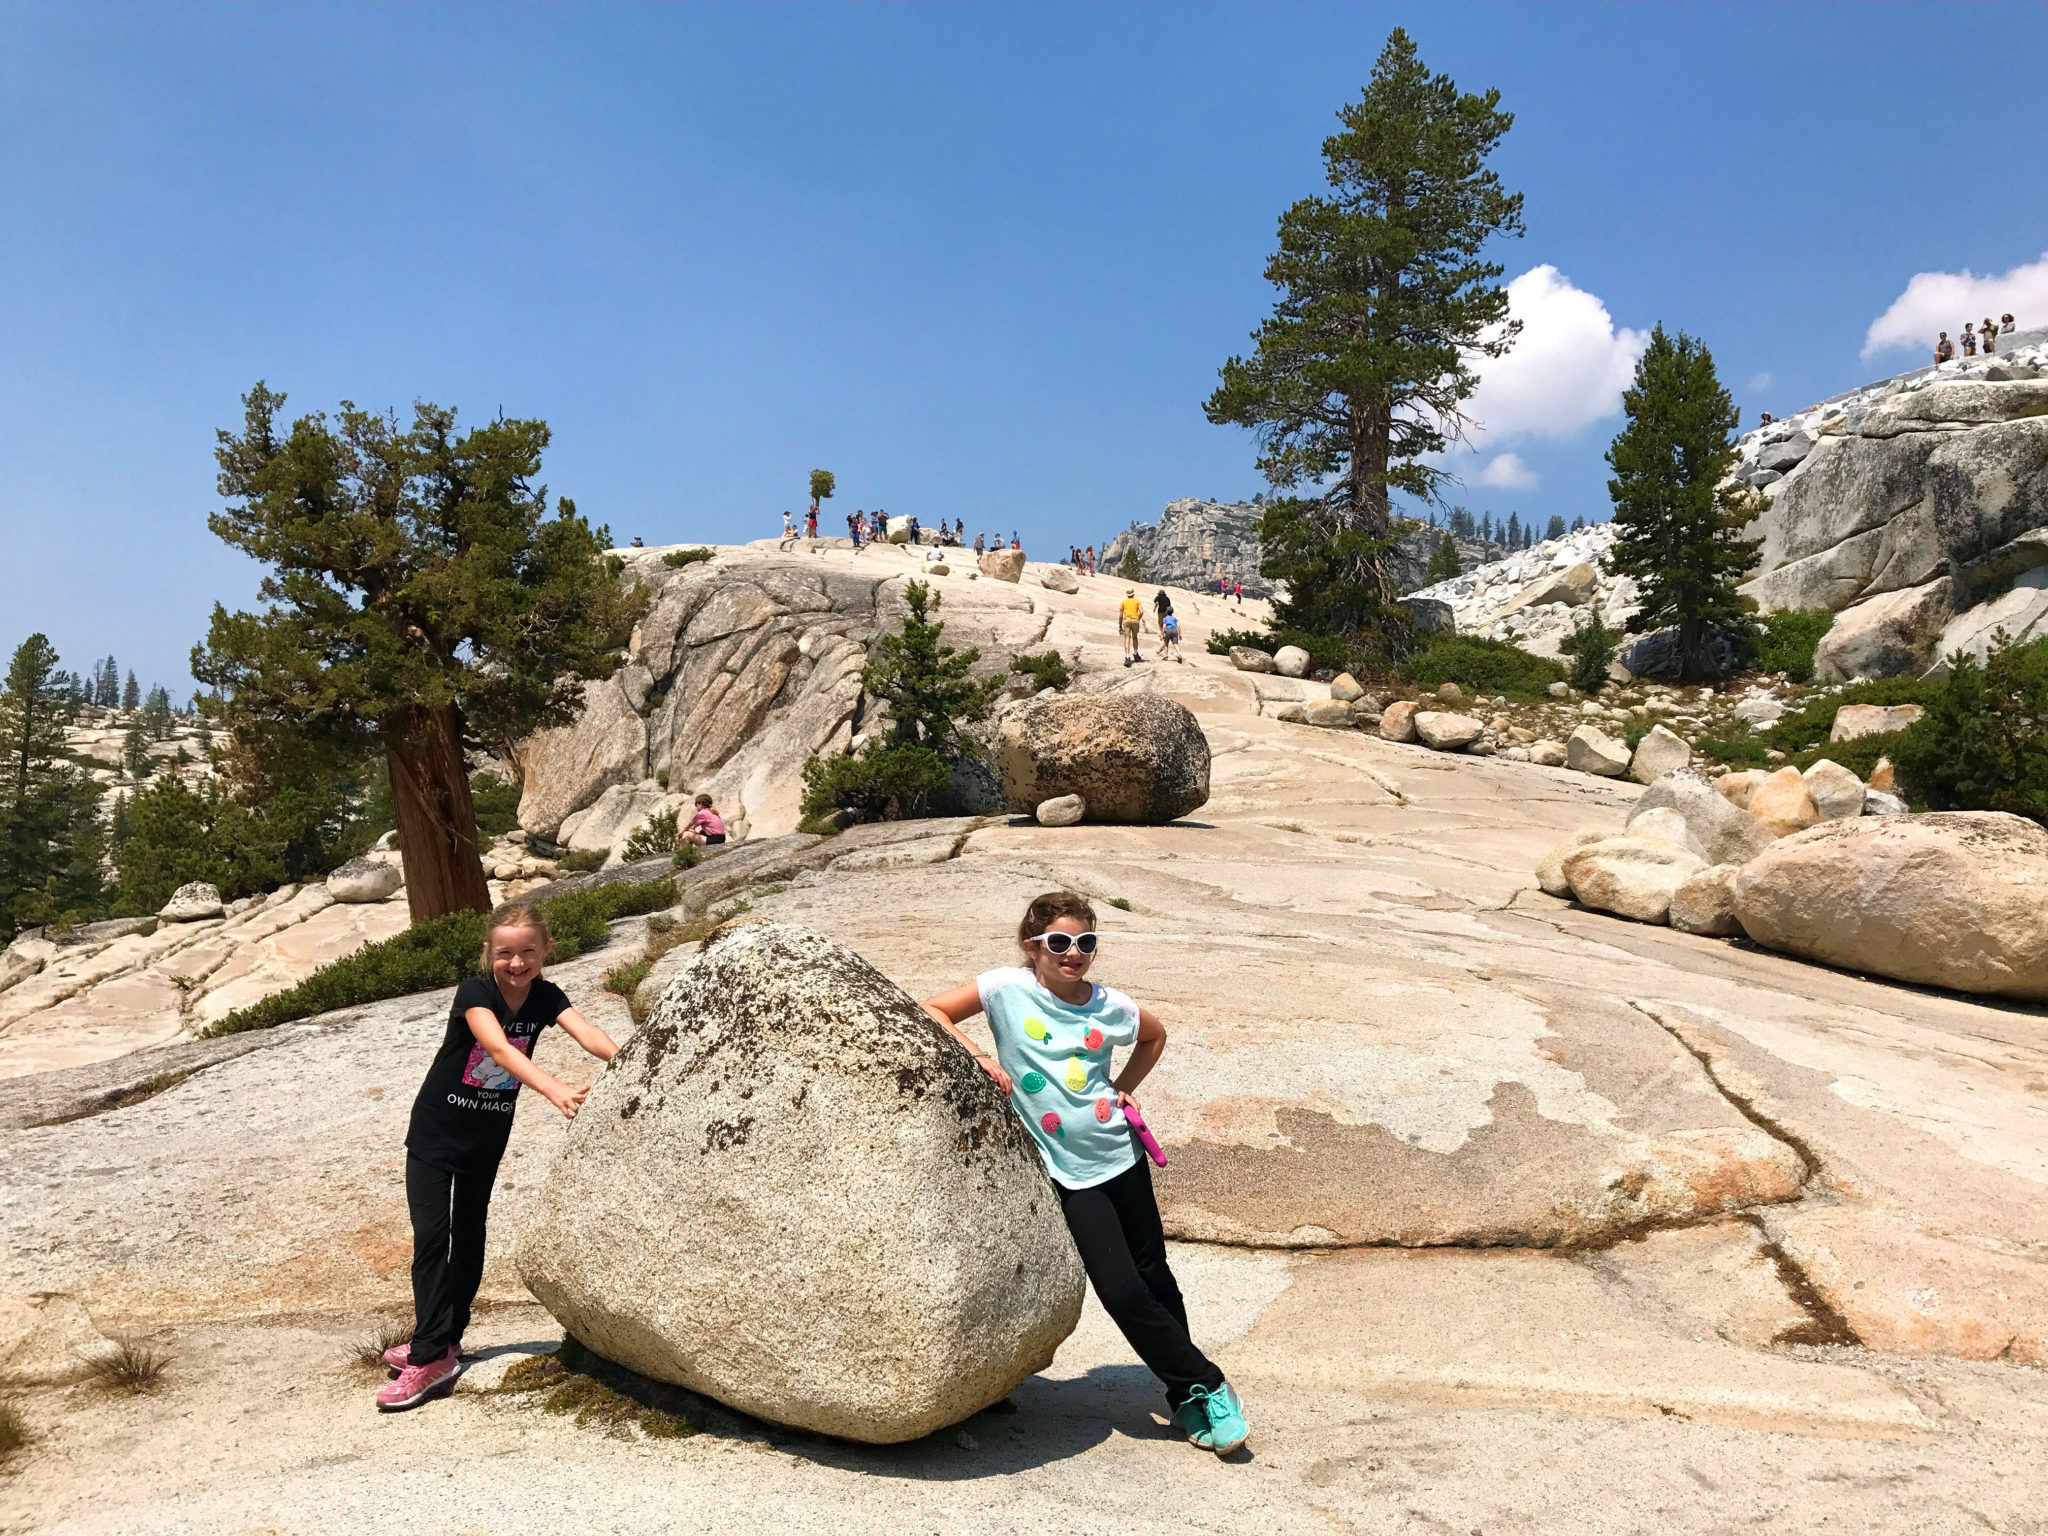 Our daughters on the granite at Olmsted Point near Tioga Road